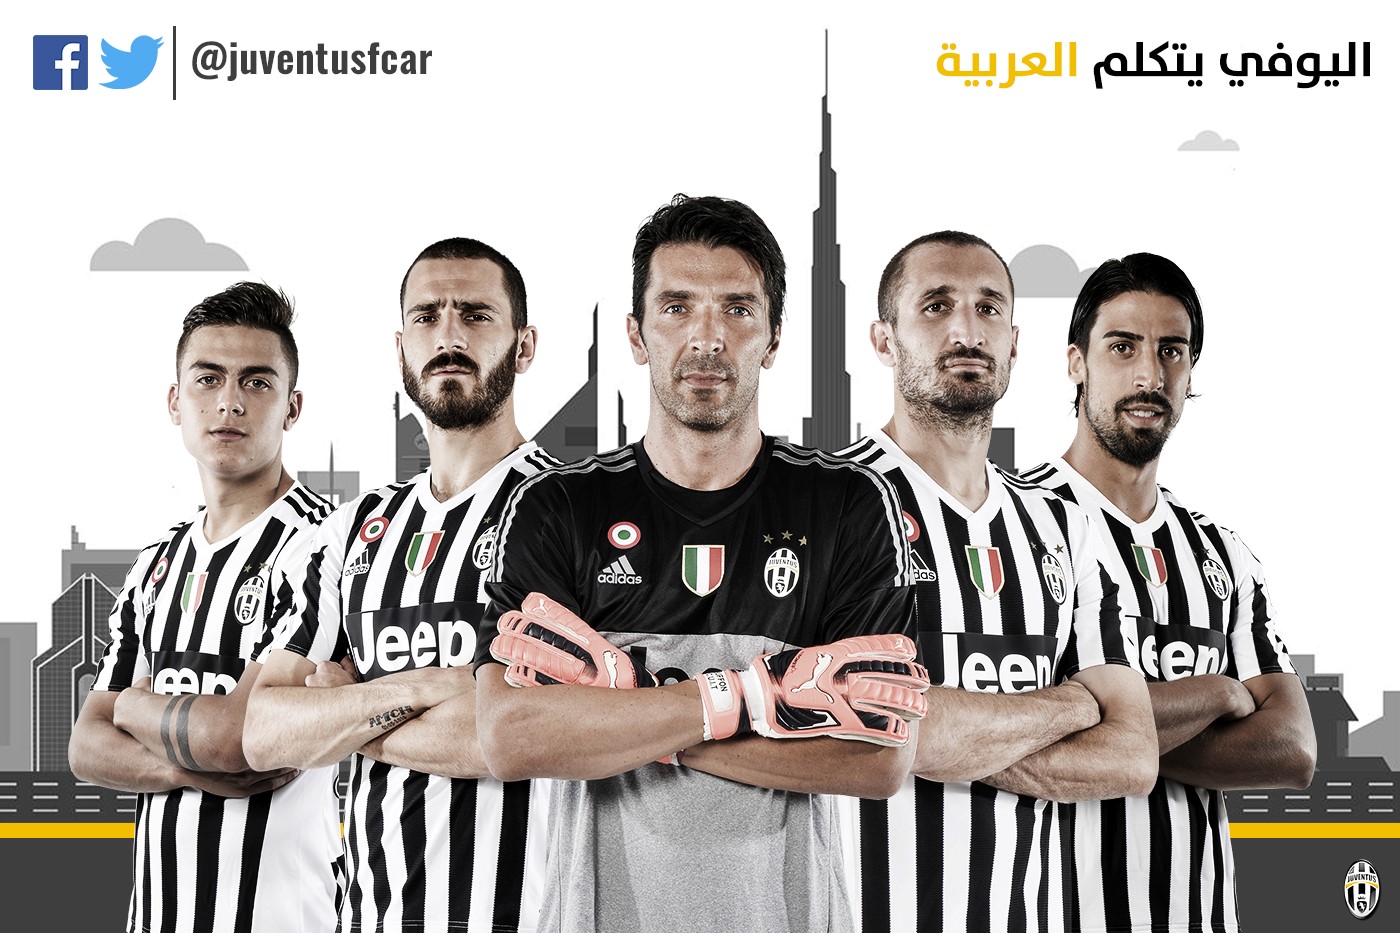 Juve link with KingFut to launch Arabic language service - Inside World Football1400 x 933